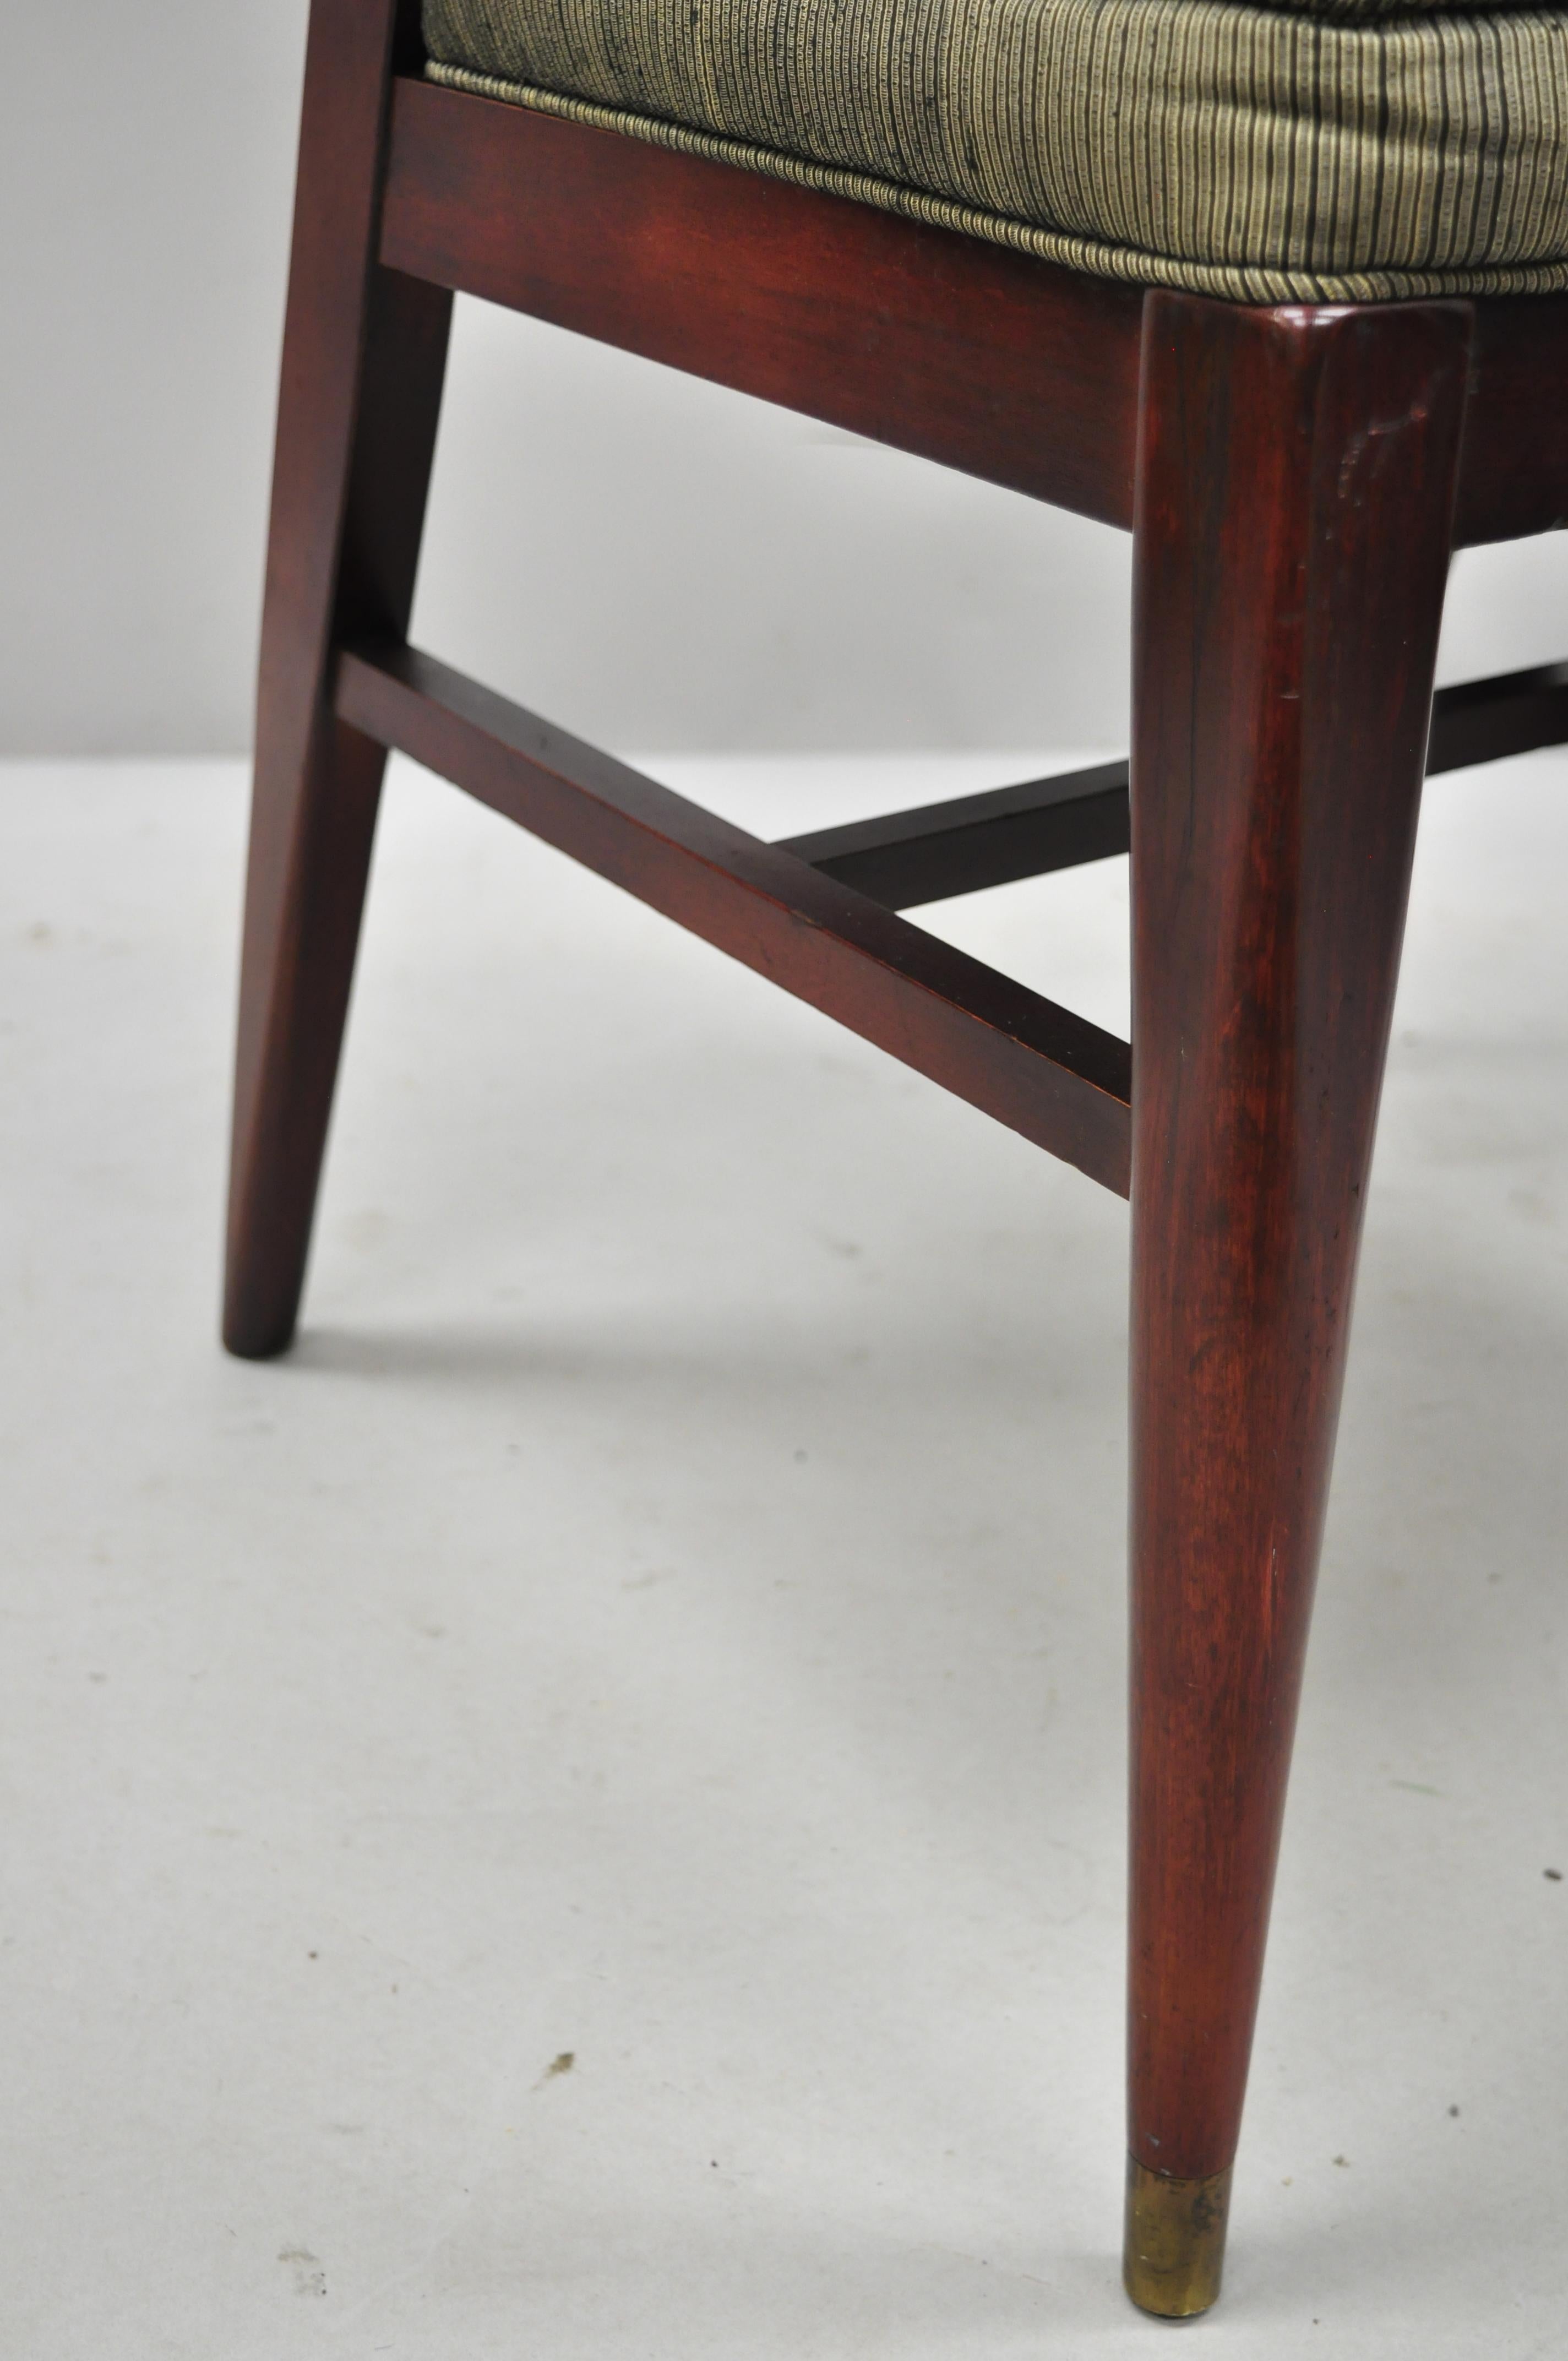 Vintage Mid-Century Modern Horseshoe Curved Back Mahogany Dining Chair B In Good Condition For Sale In Philadelphia, PA